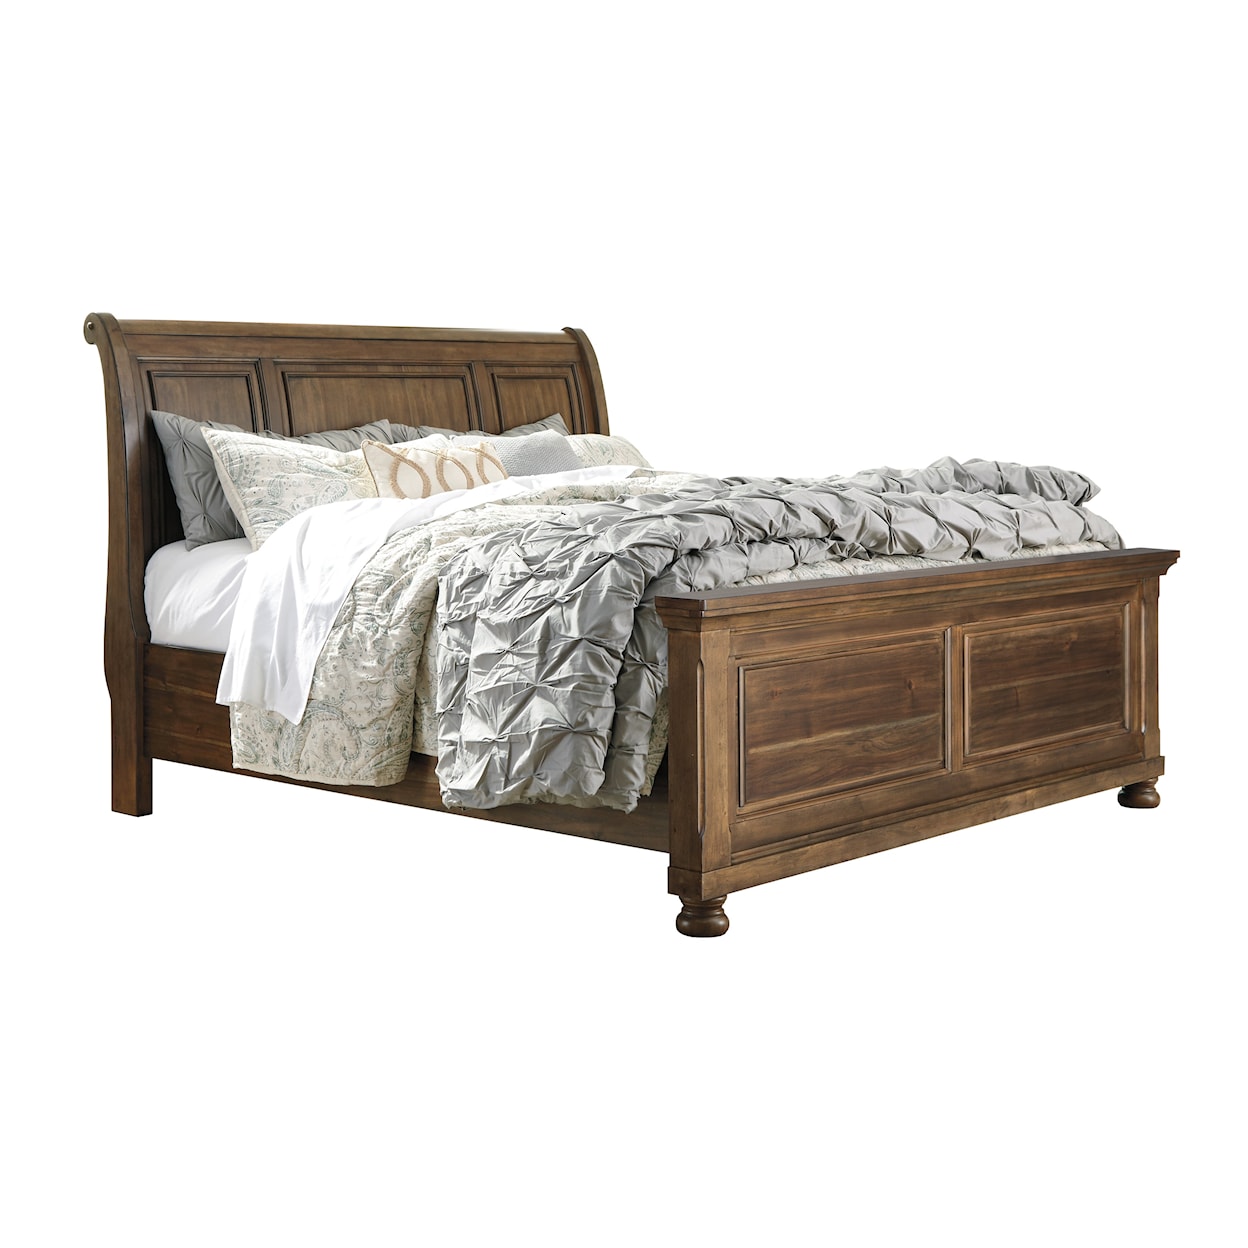 Signature Design by Ashley Furniture Flynnter King Sleigh Bed